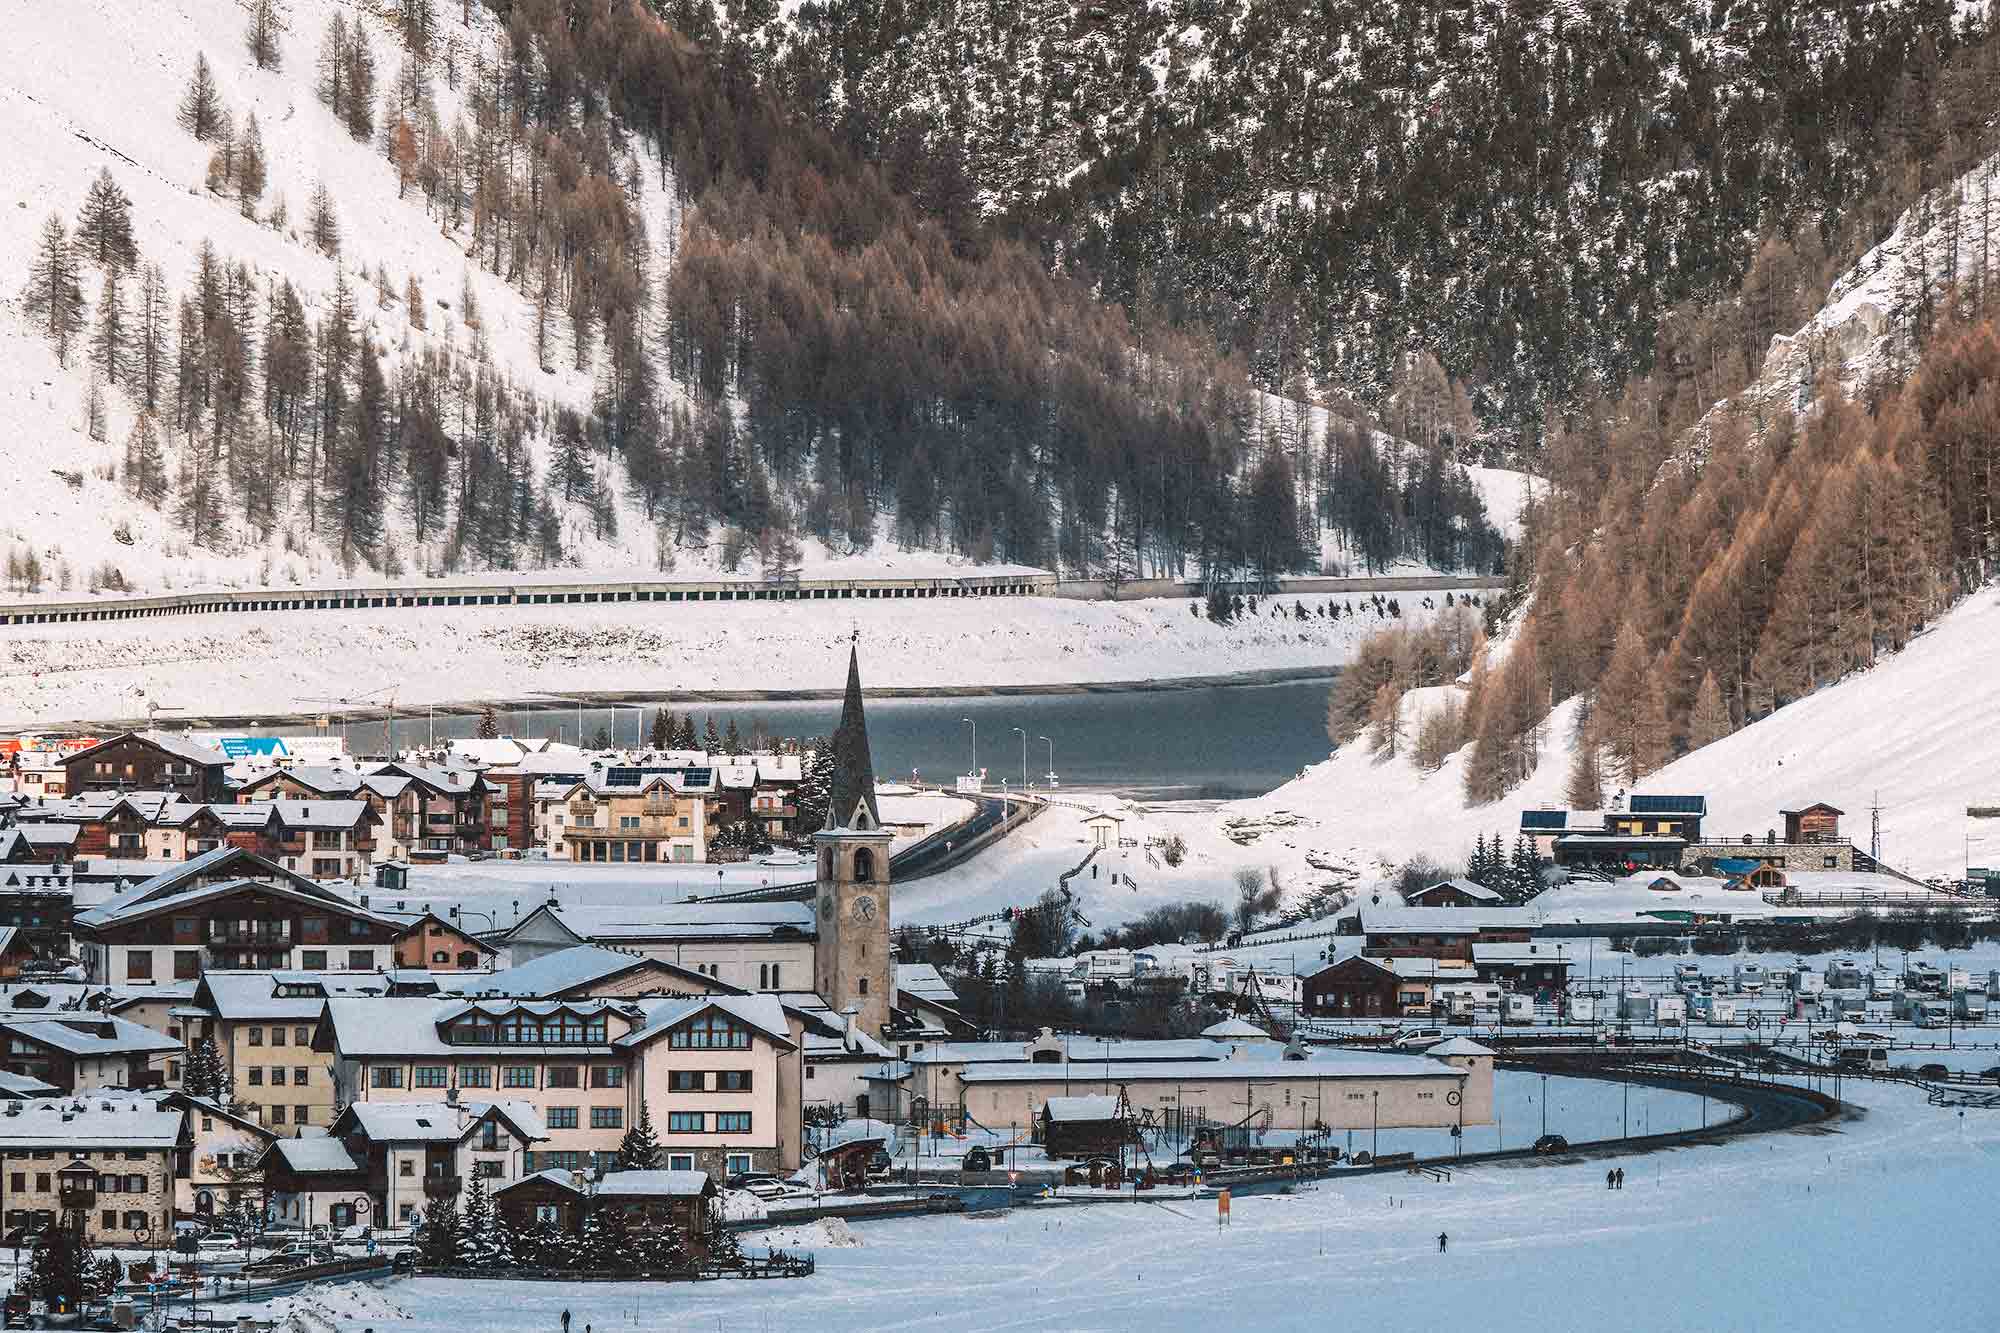 Snowy landscape of the Livigno valley surrounded by mountains.